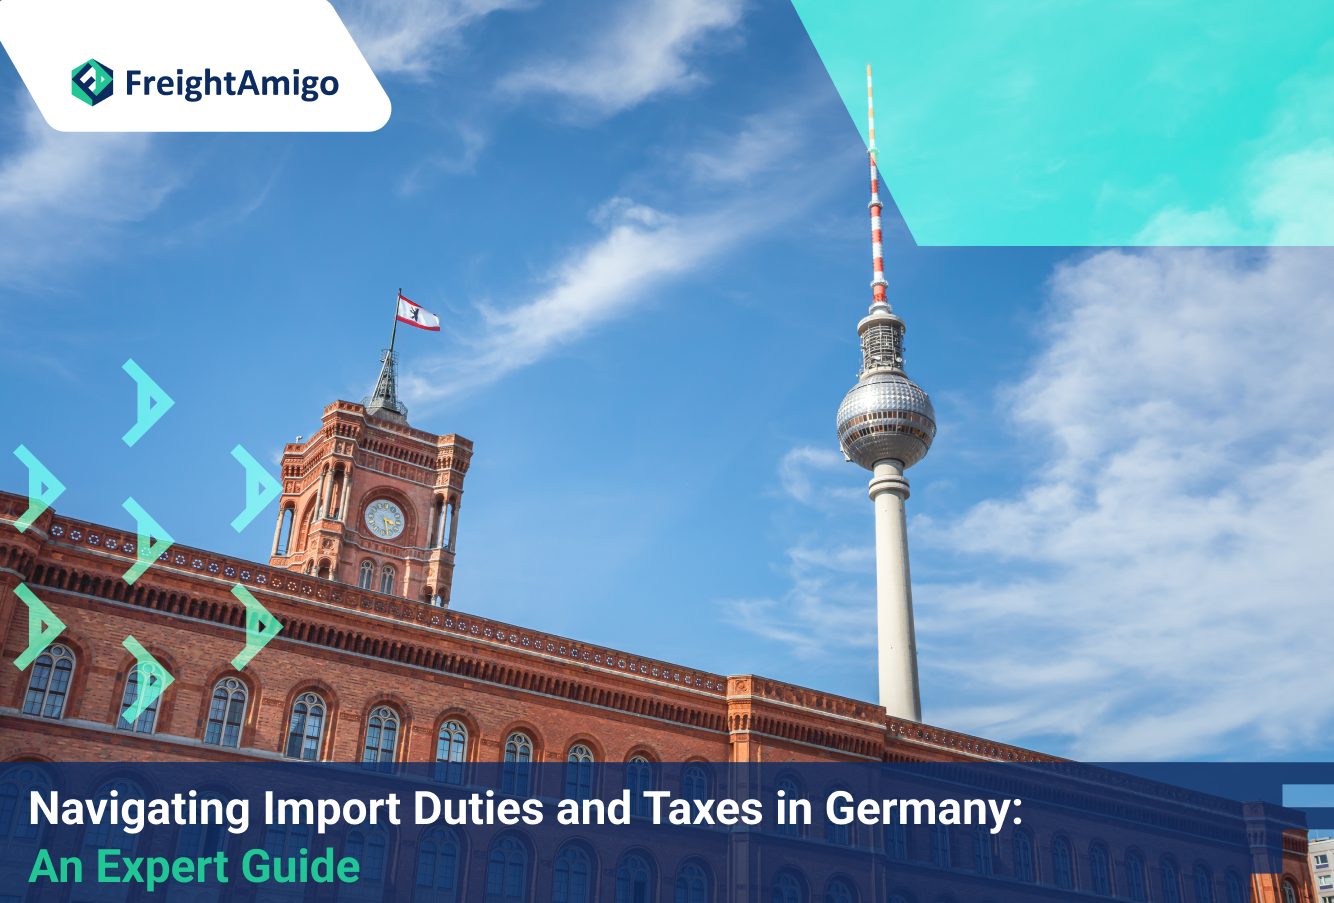 Navigating Import Duties and Taxes in Germany: An Expert Guide